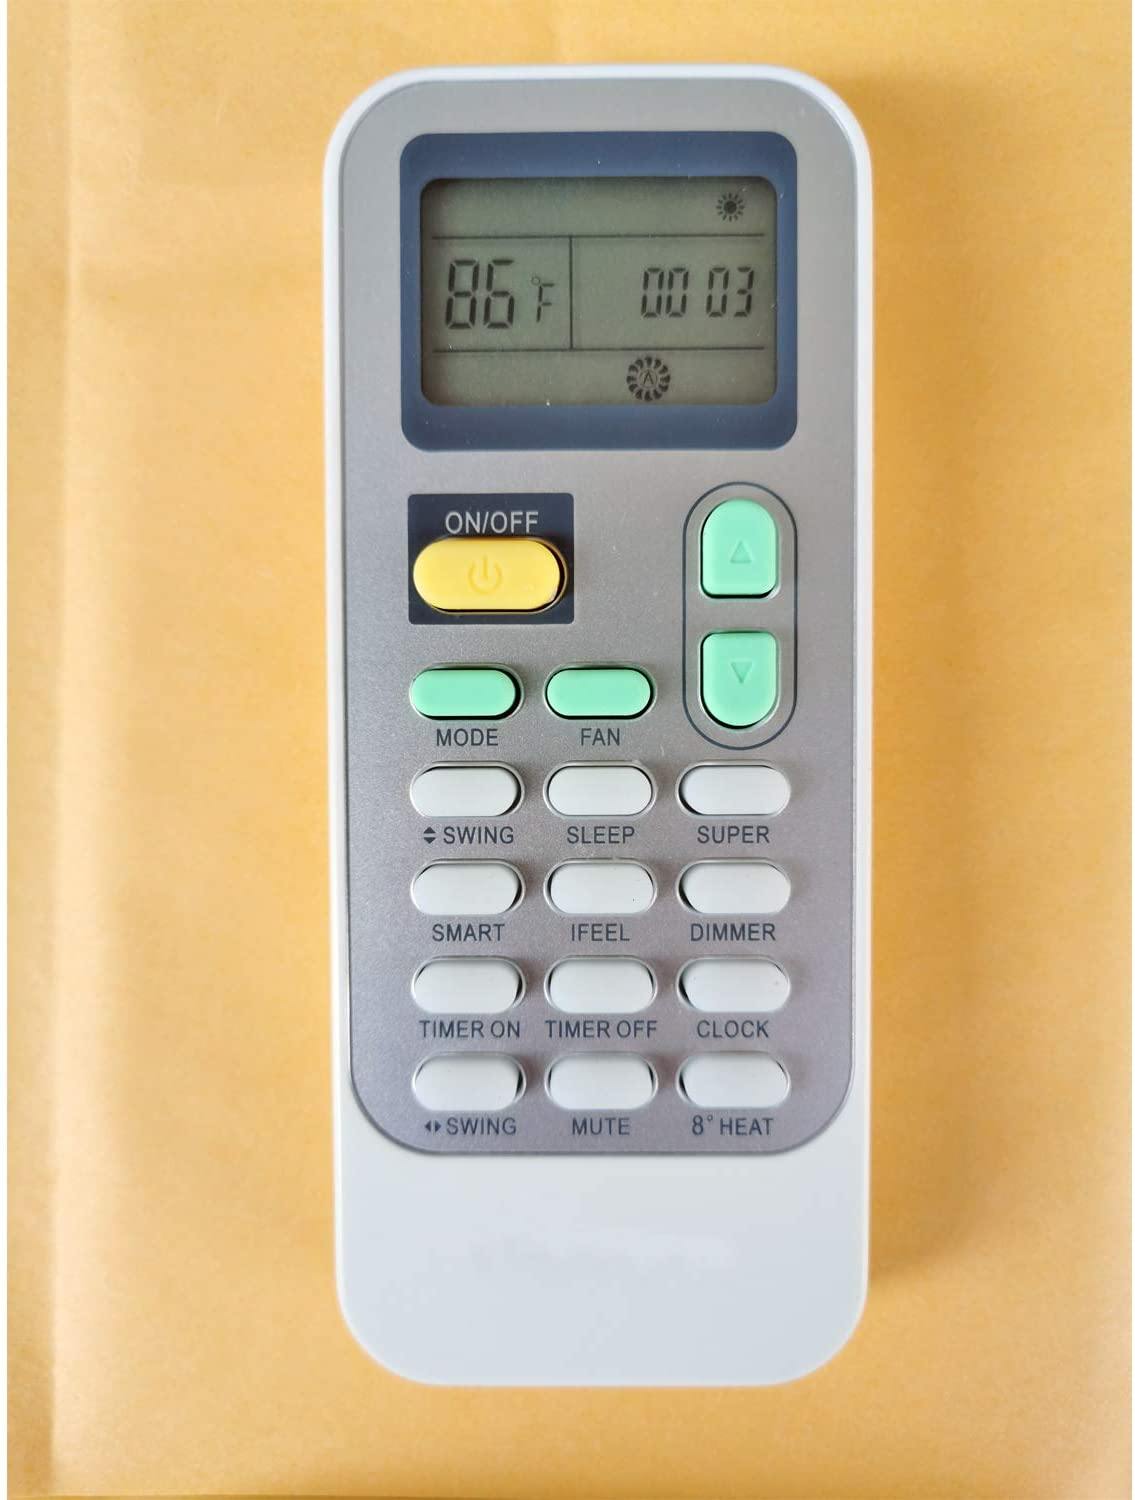 Replacement Remote for Hisense - Model: DG11J1-72 - China Air Conditioner Remotes :: Cheapest AC Remote Solutions